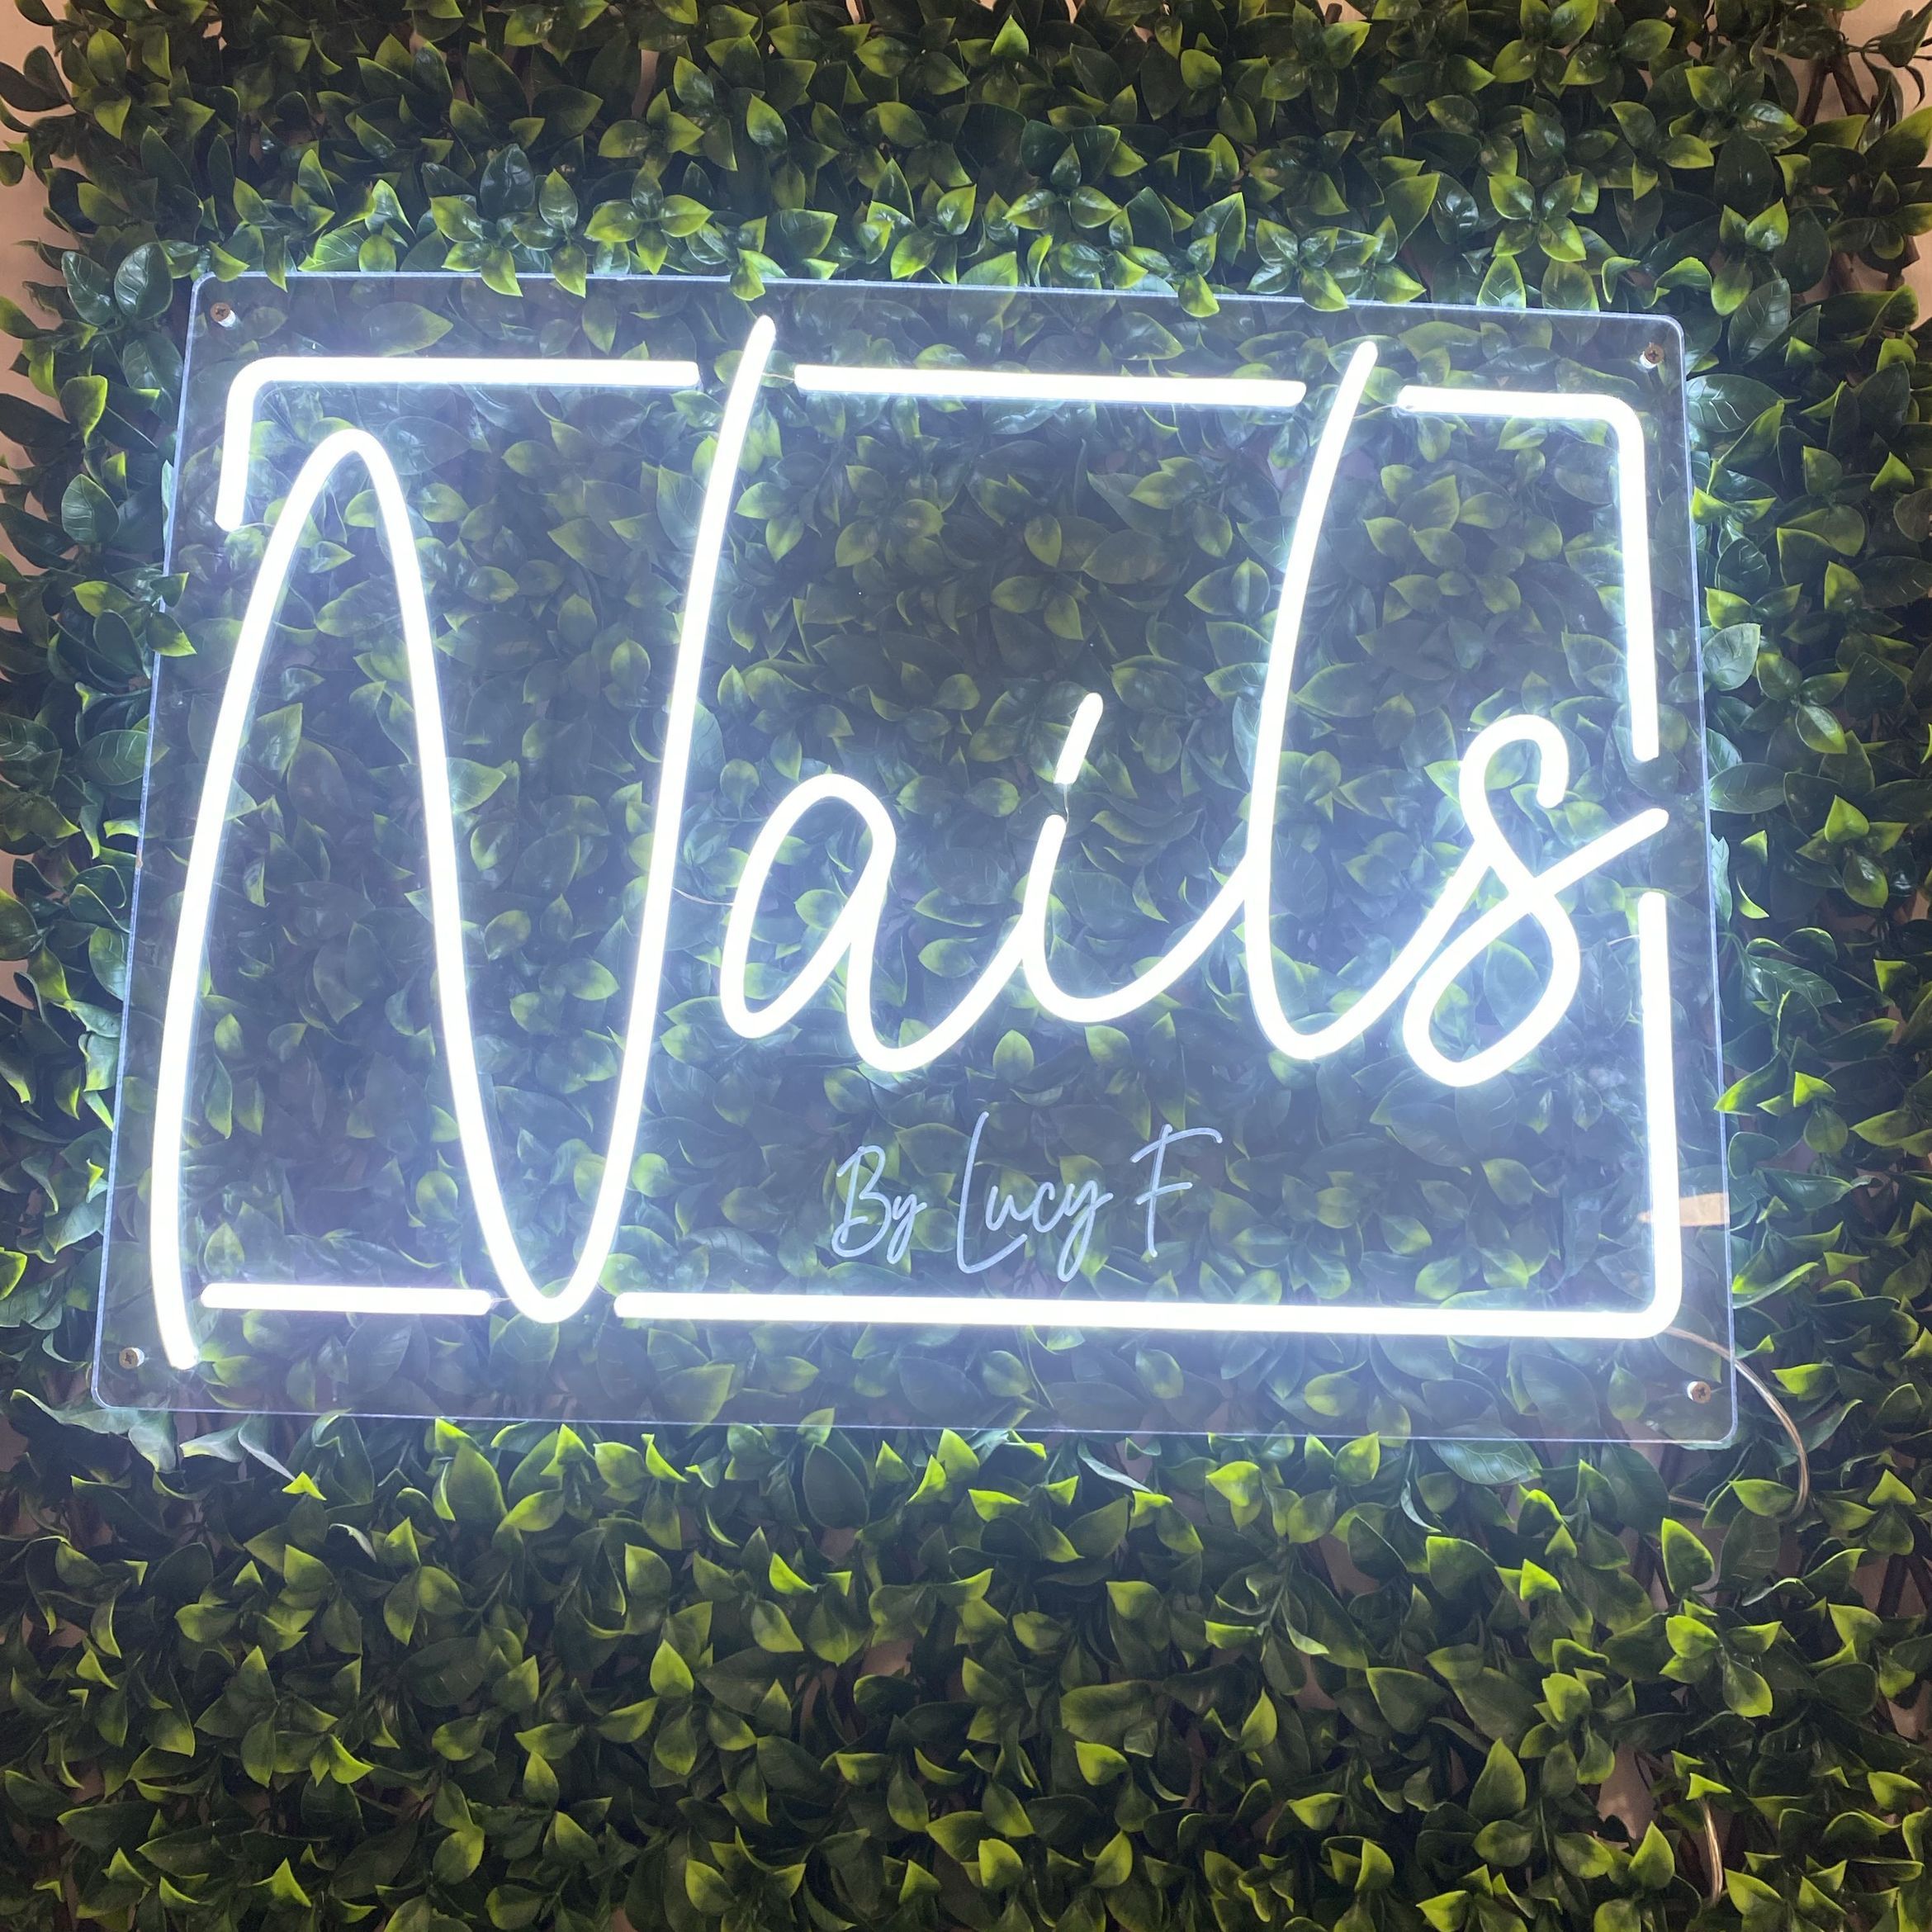 Nails by Lucy F, Samlet Road, SA7 9AG, Swansea